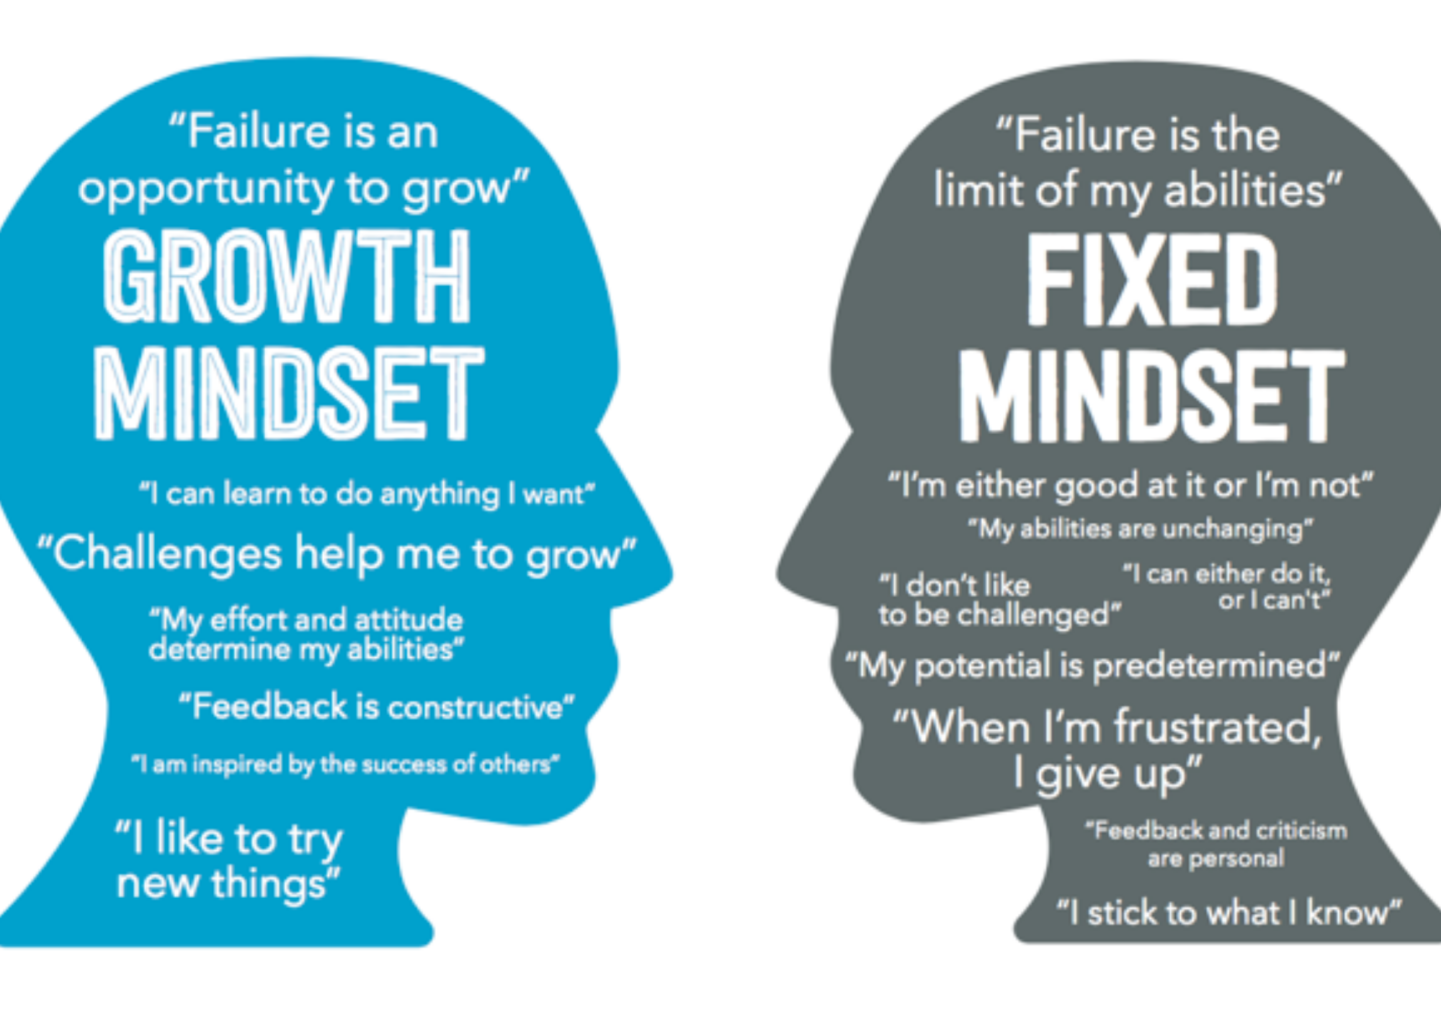 8 Qualities that Support a Growth Mindset